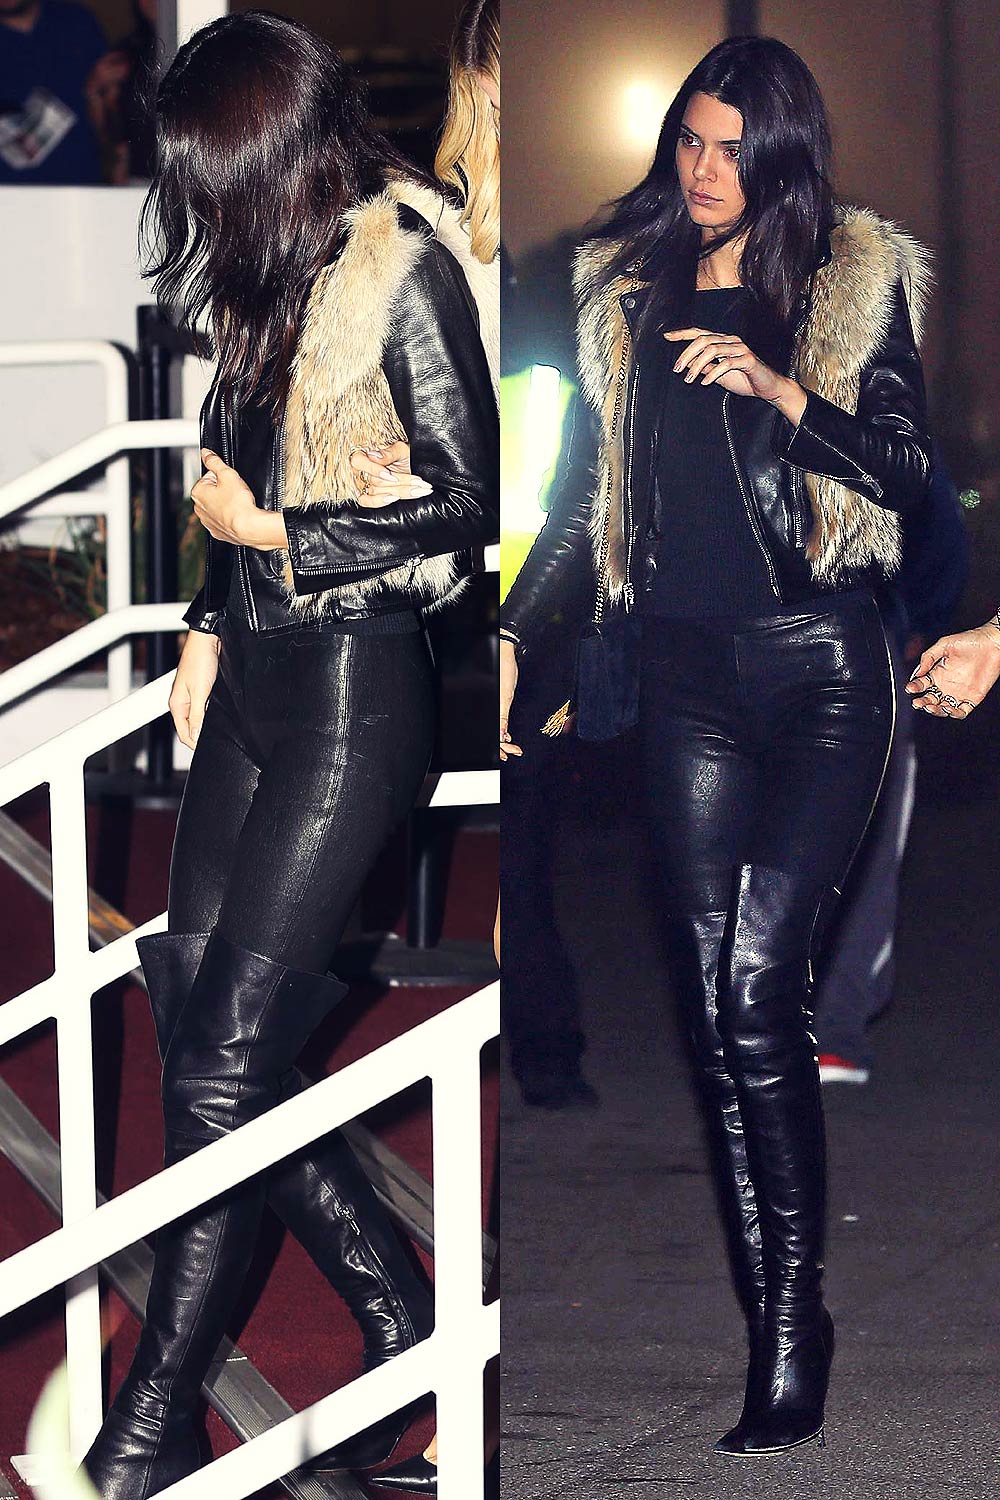 Kendall Jenner leaving The Weeknd’s concert in LA